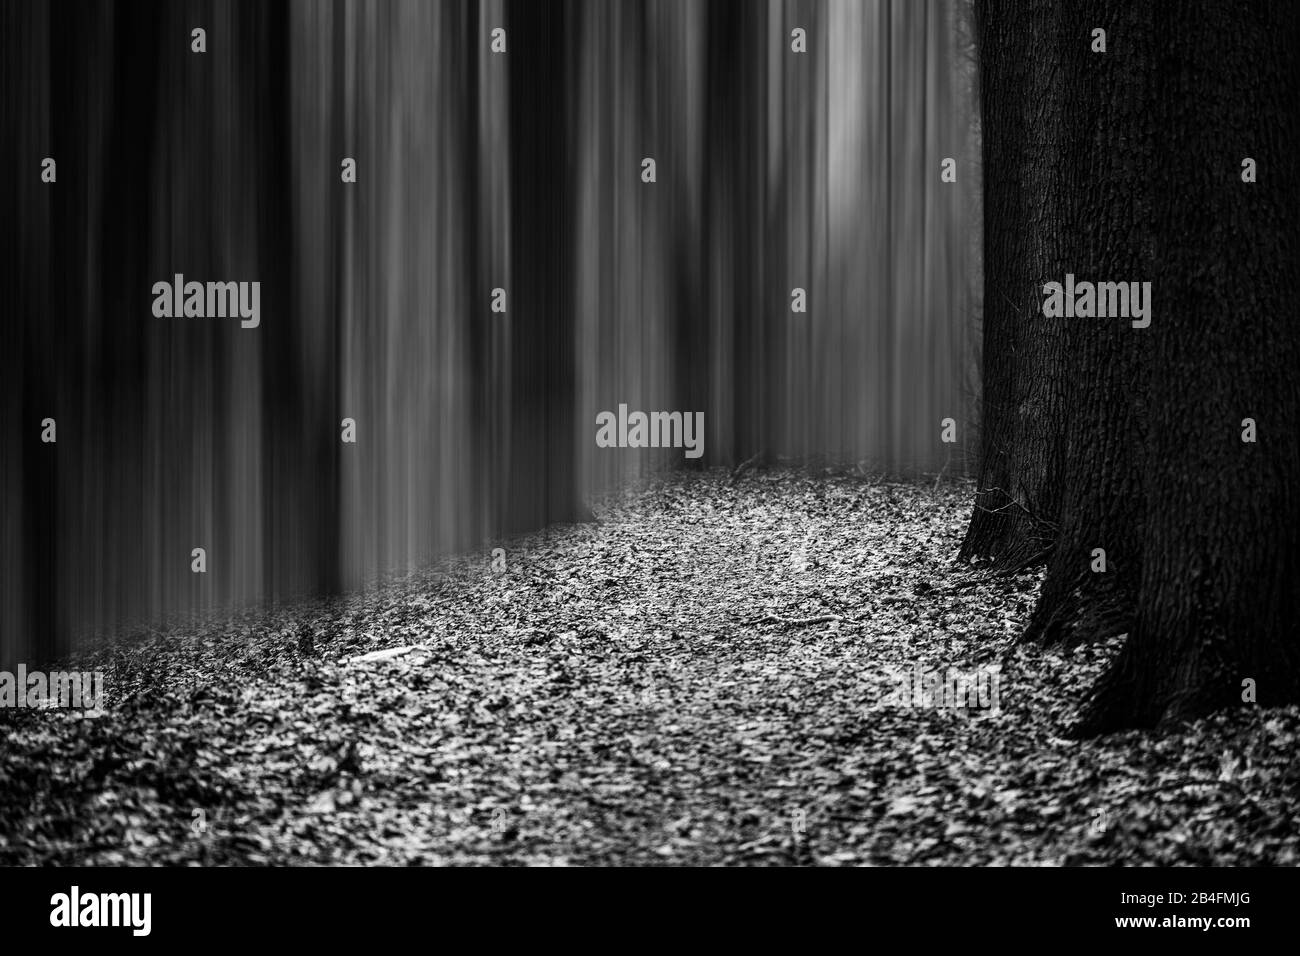 Forest in Winter with Surreal edited of trees Stock Photo